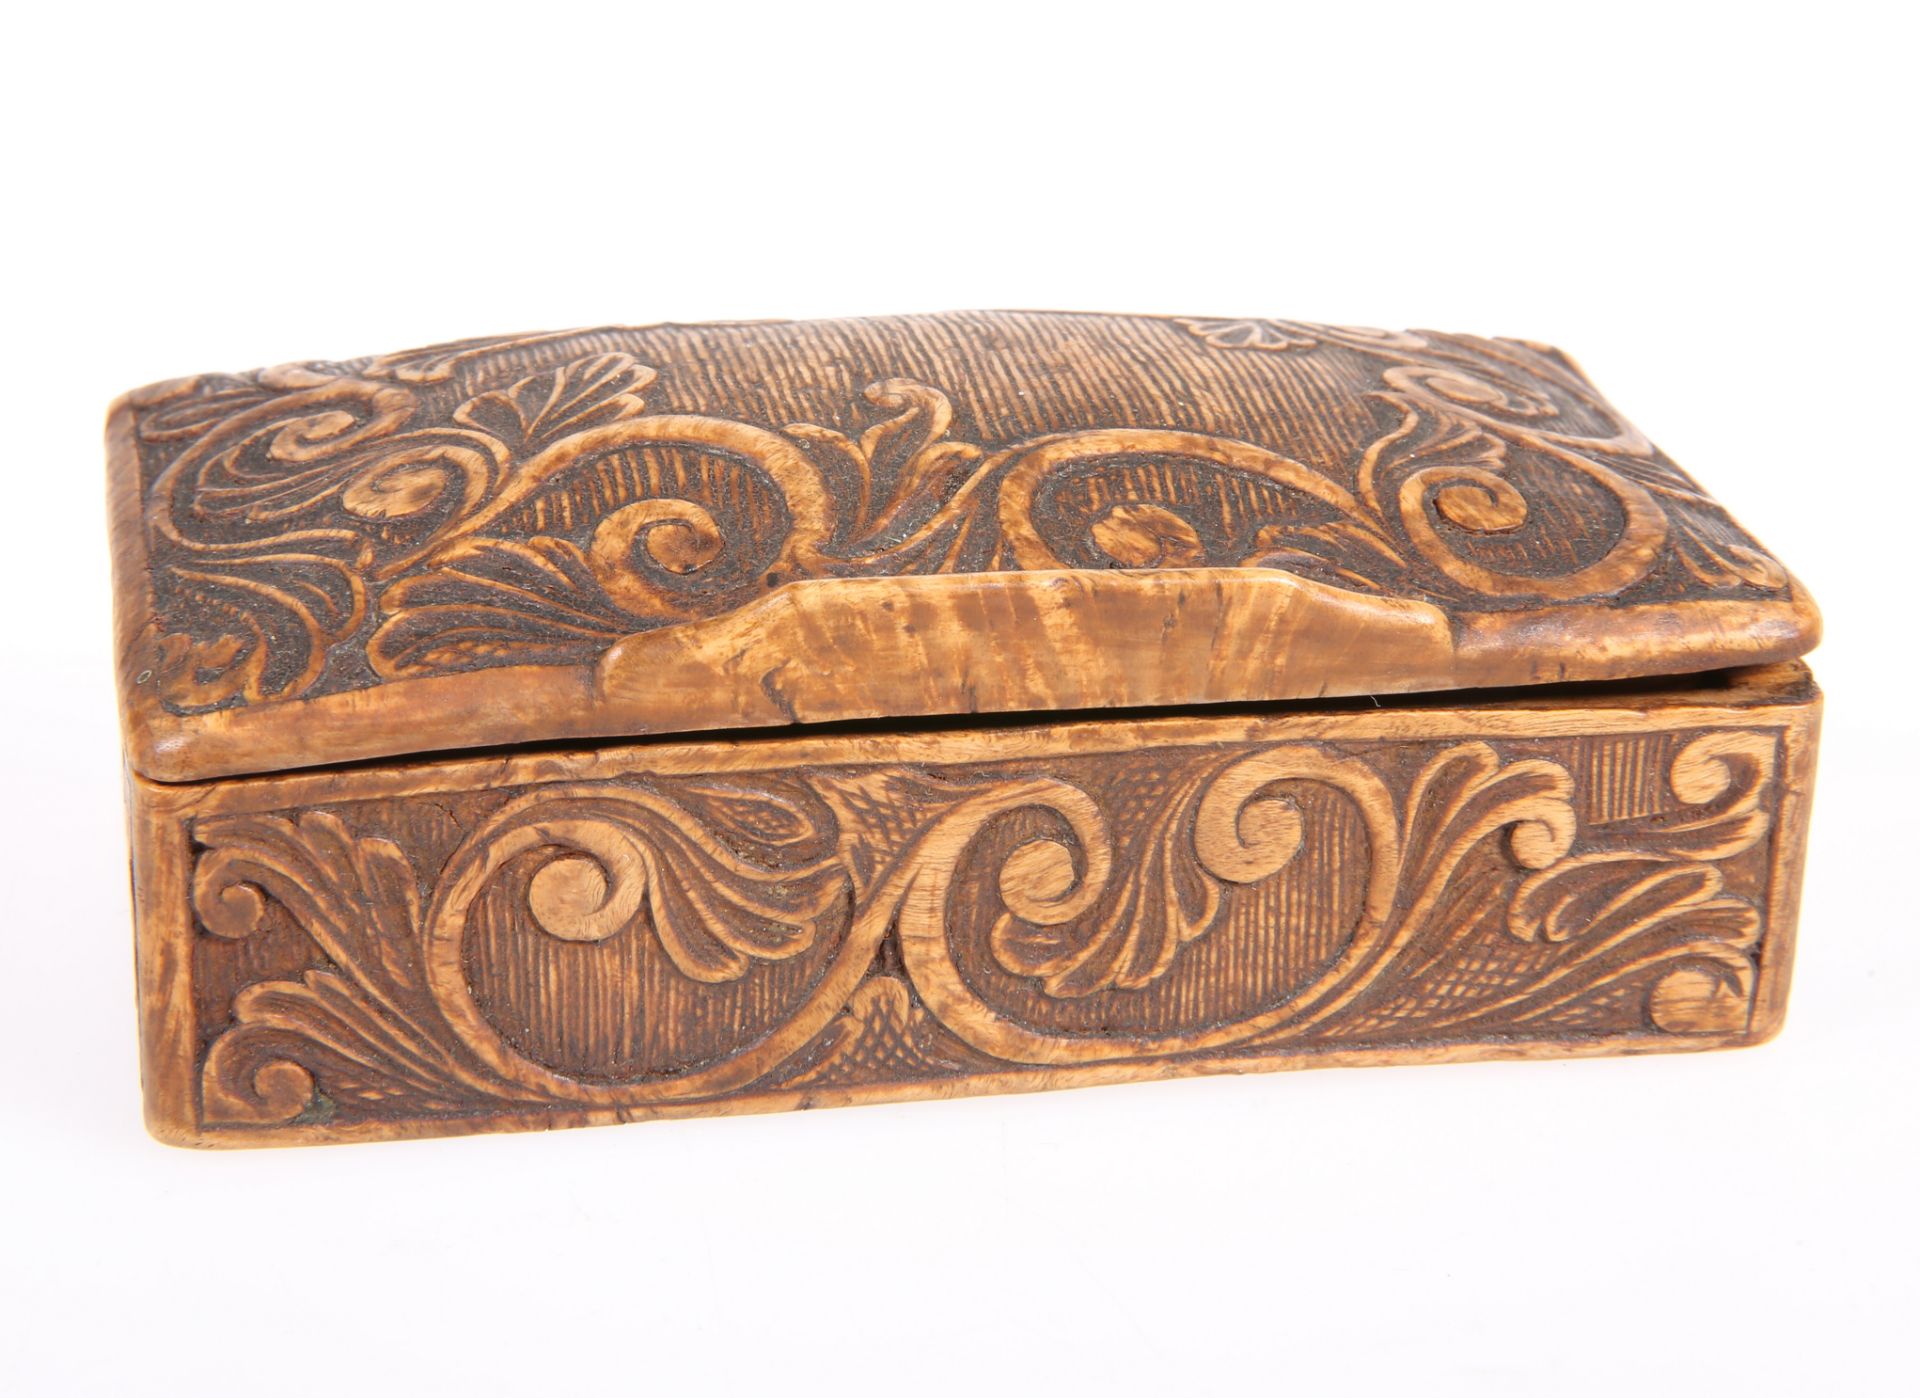 A CONTINENTAL CARVED WOOD SNUFF BOX